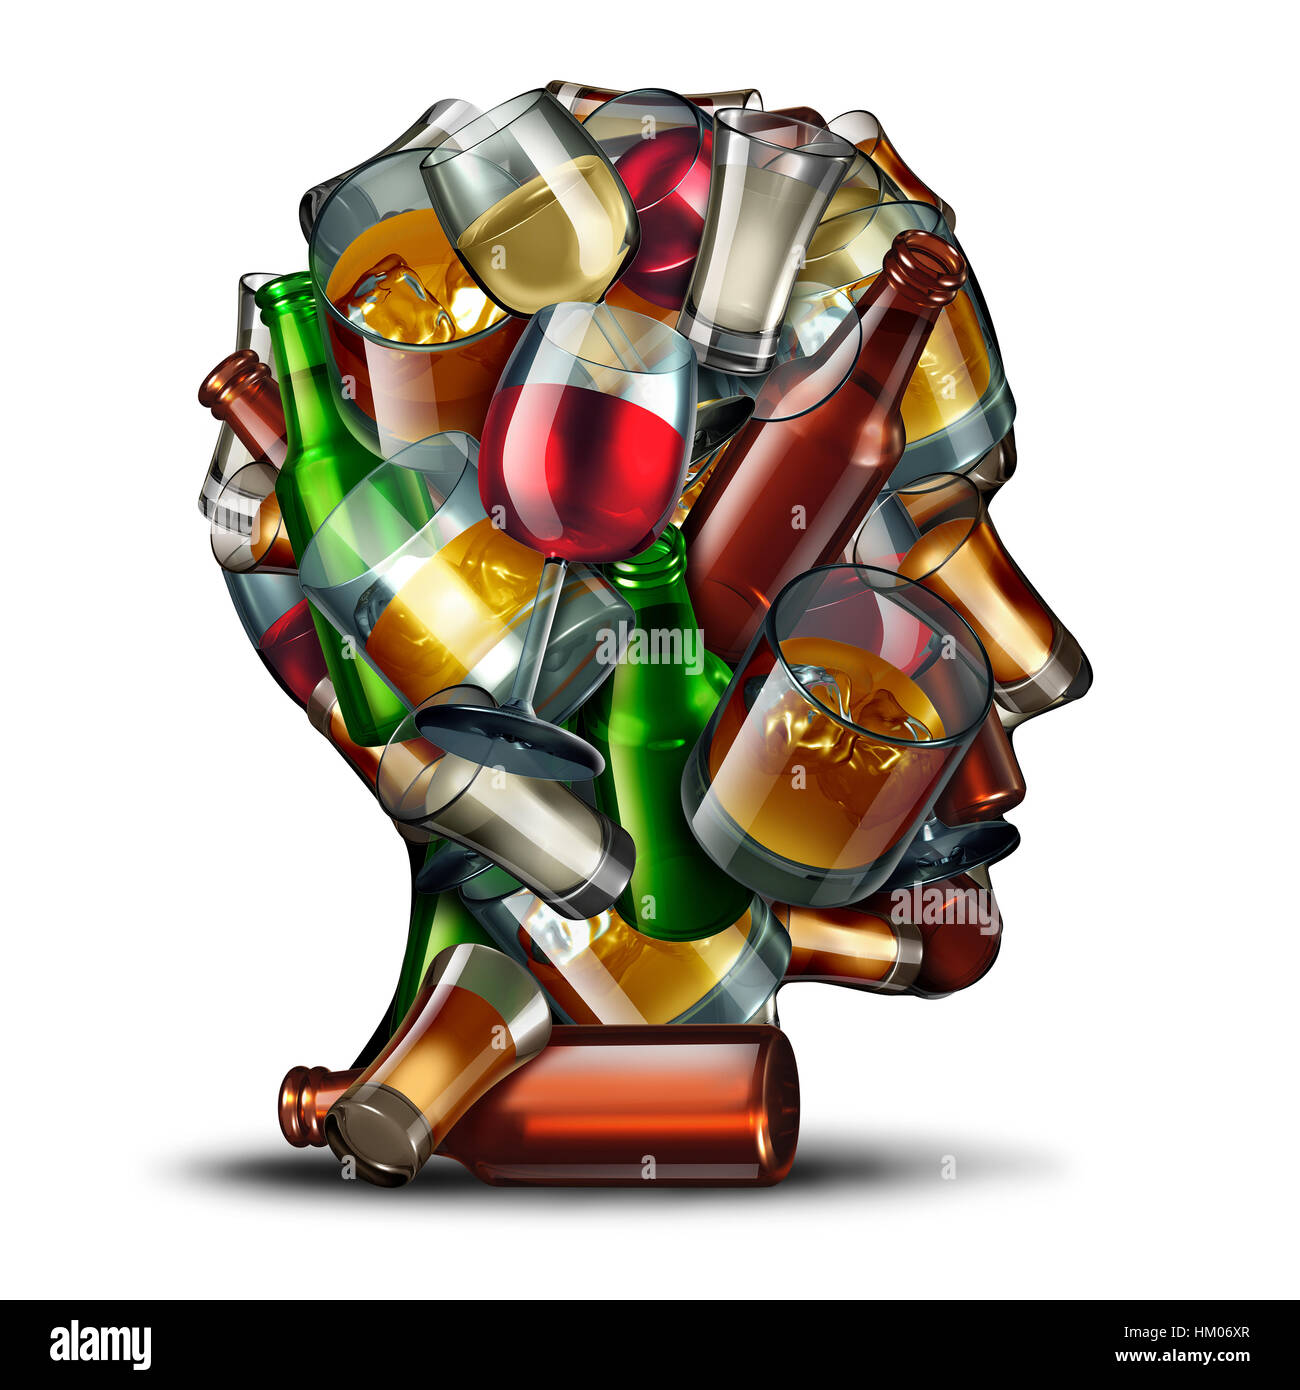 Alcohol psychology and alcoholism concept as a group of beer wine and hard liquor glasses shaped as a a human head as a symbol for an alcoholic disord Stock Photo